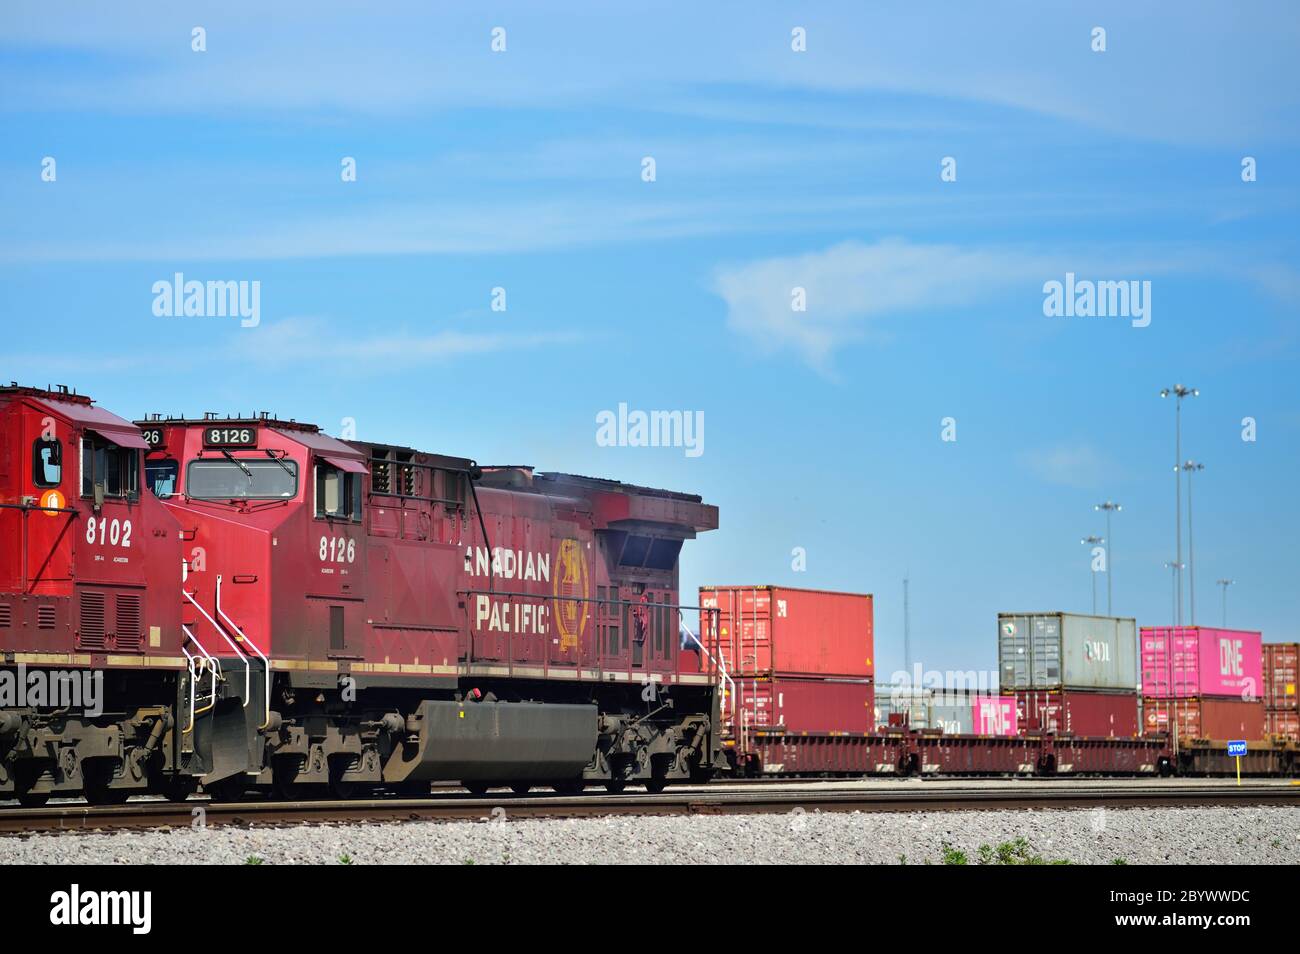 Franklin Park, Illinois, USA. Canadian Pacific Railway locomotives shunting intermodal freight cars in the railroad's Bensenville Yard. Stock Photo